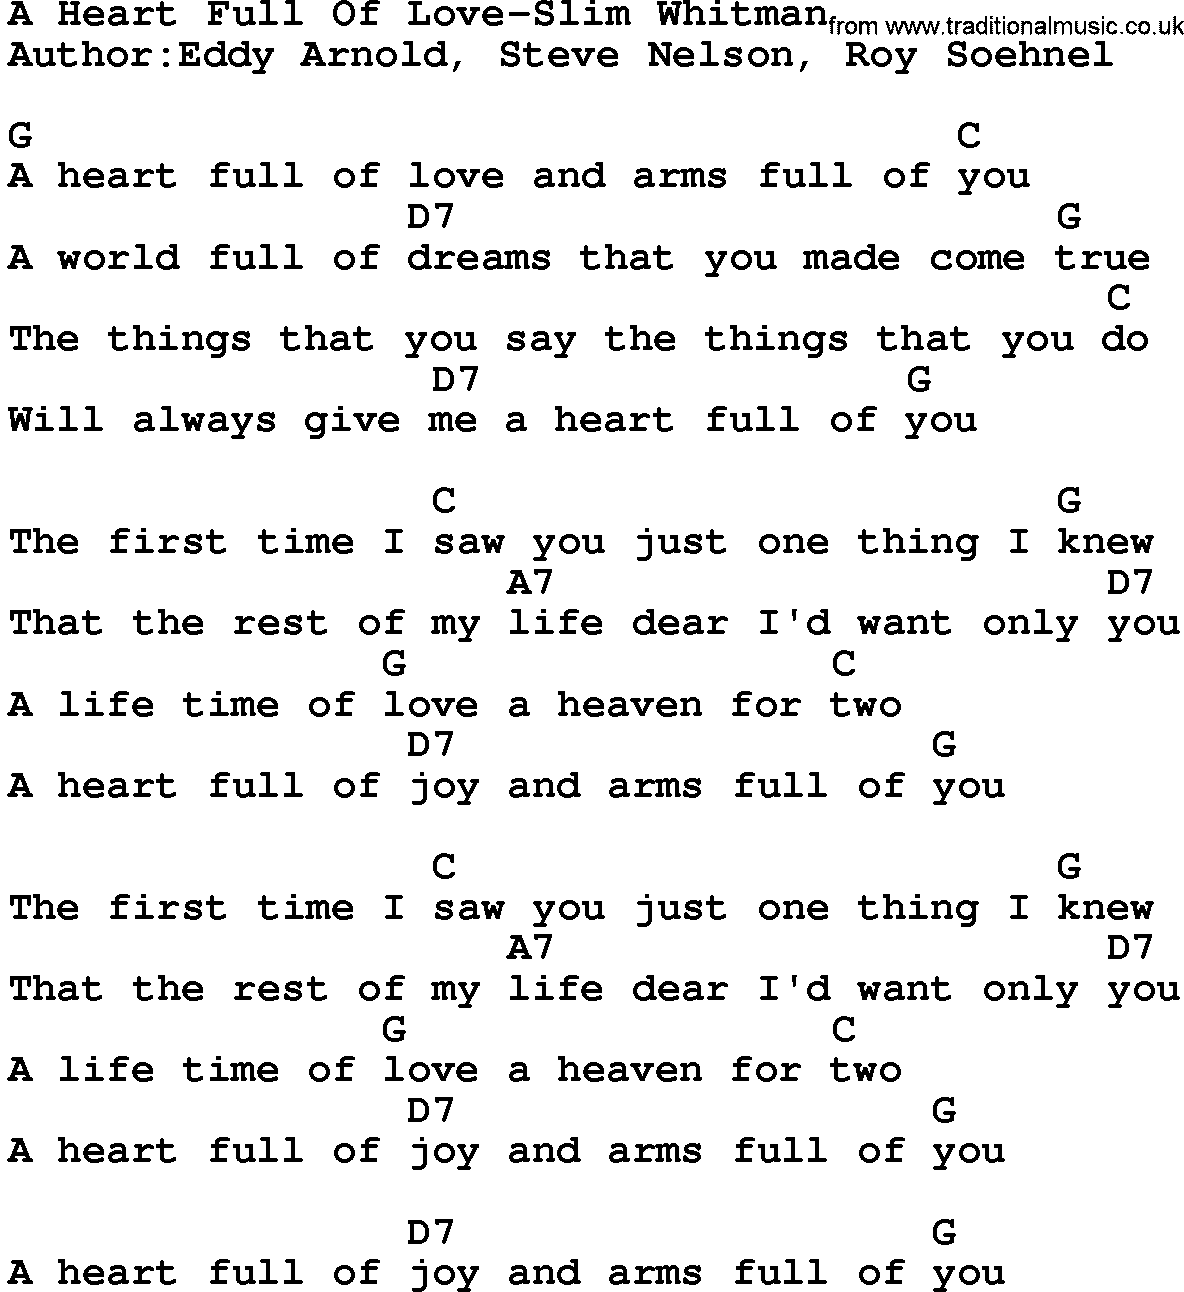 Country music song: A Heart Full Of Love-Slim Whitman lyrics and chords